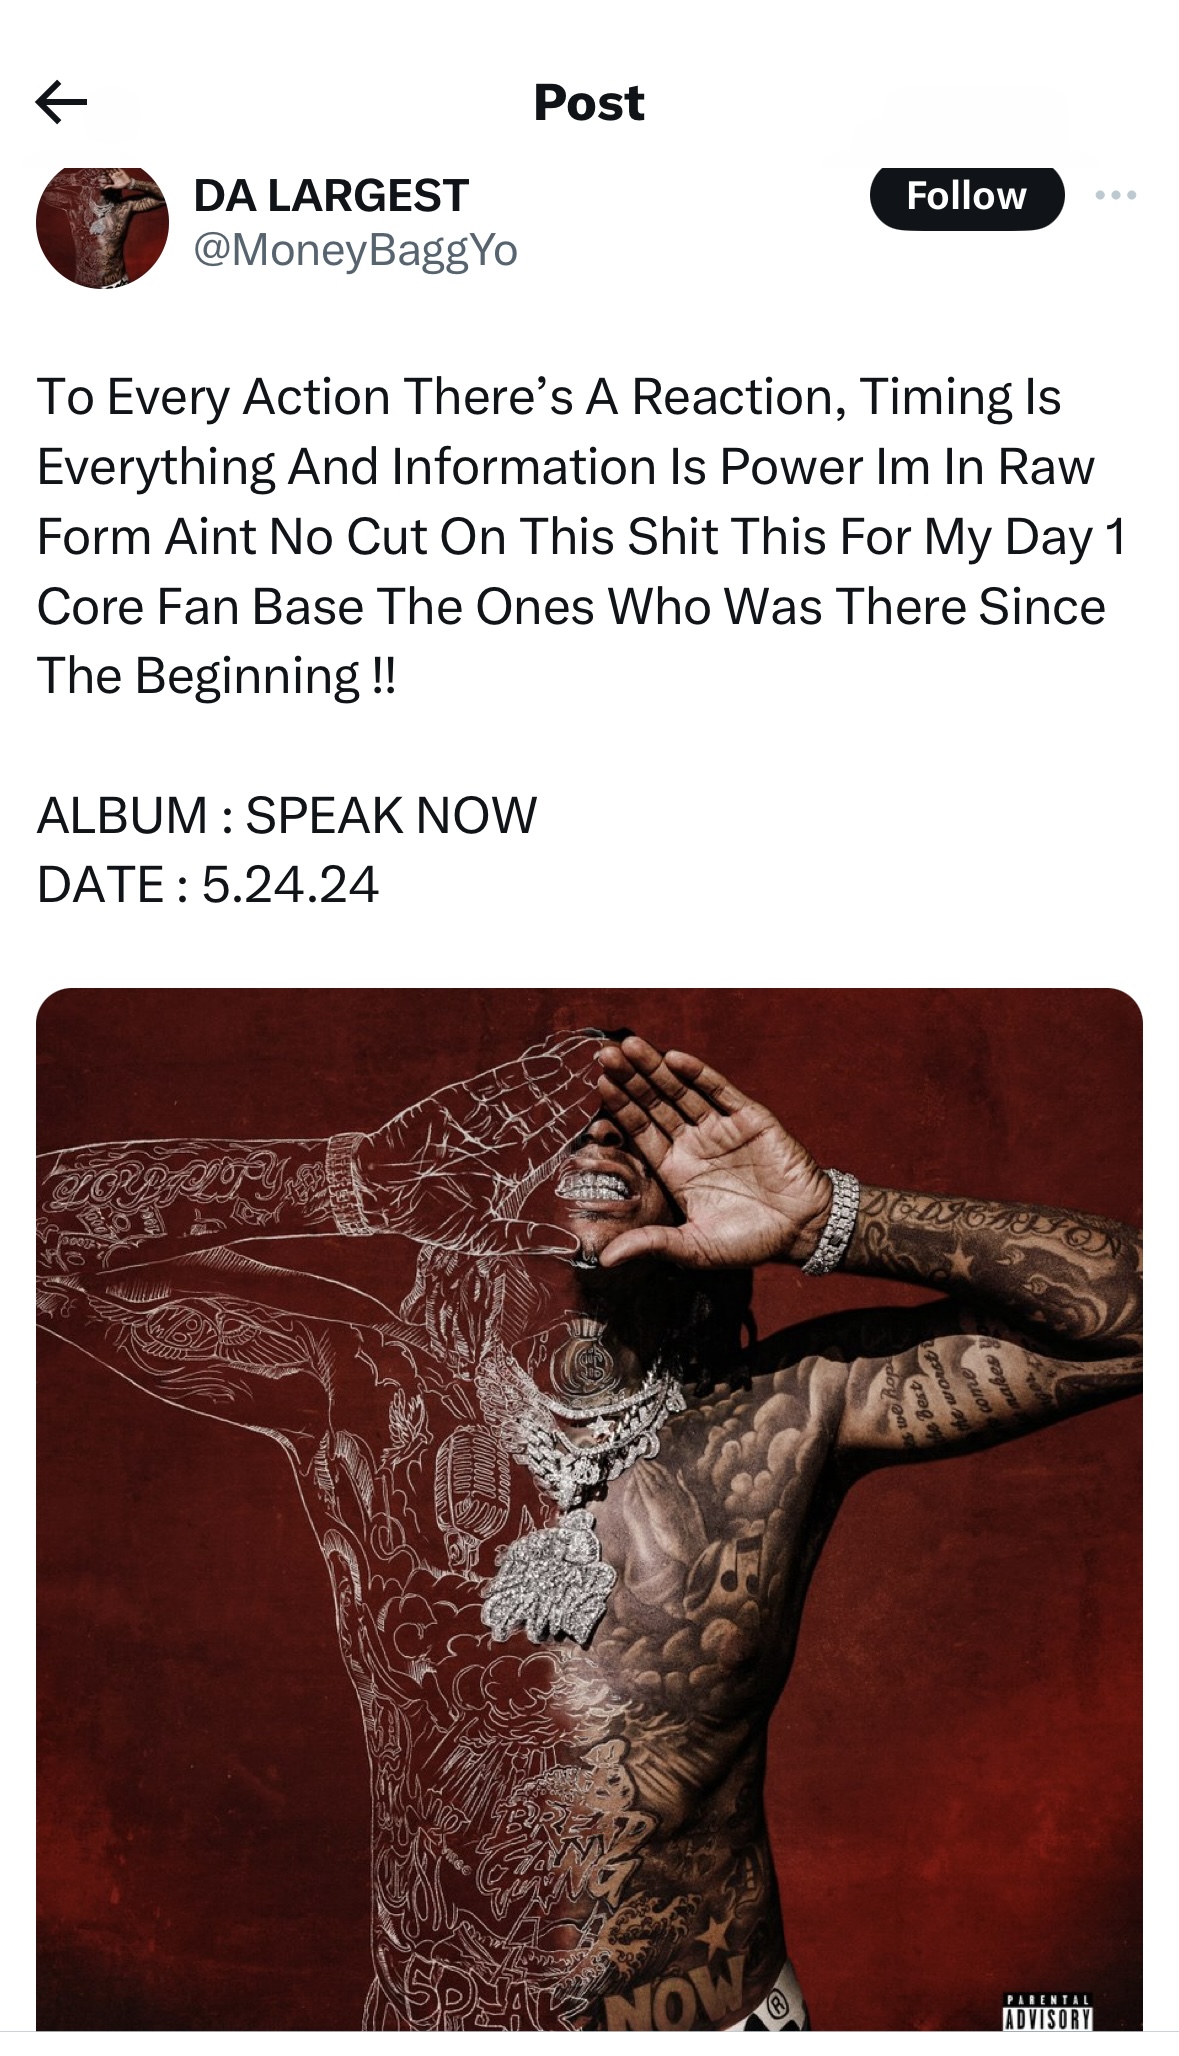 Moneybagg Yo to release “Speak Now” album on May 24